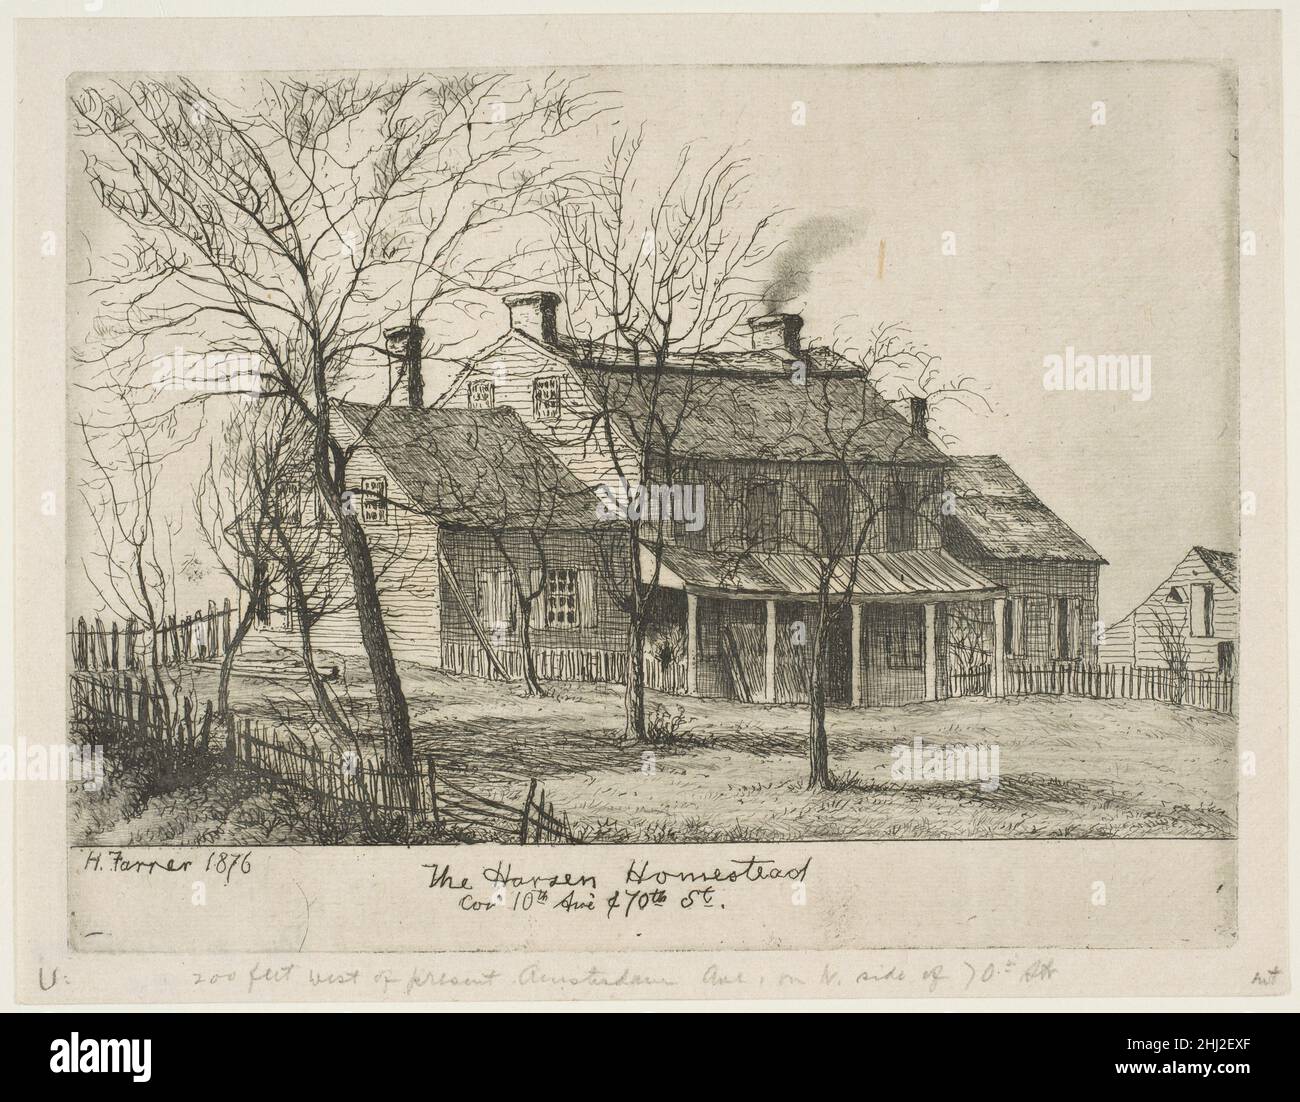 The Harsen Homestead, Corner of 10th Avenue and 70th Street (from Scenes of Old New York) 1876 Henry Farrer American. The Harsen Homestead, Corner of 10th Avenue and 70th Street (from Scenes of Old New York)  380990 Artist: Henry Farrer, American, London 1844?1903 New York, The Harsen Homestead, Corner of 10th Avenue and 70th Street (from Scenes of Old New York), 1876, Etching, plate: 4 11/16 x 6 3/16 in. (11.9 x 15.7 cm) sheet: 5 3/16 x 2 3/4 in. (13.2 x 7 cm). The Metropolitan Museum of Art, New York. The Edward W. C. Arnold Collection of New York Prints, Maps and Pictures, Bequest of Edward Stock Photo